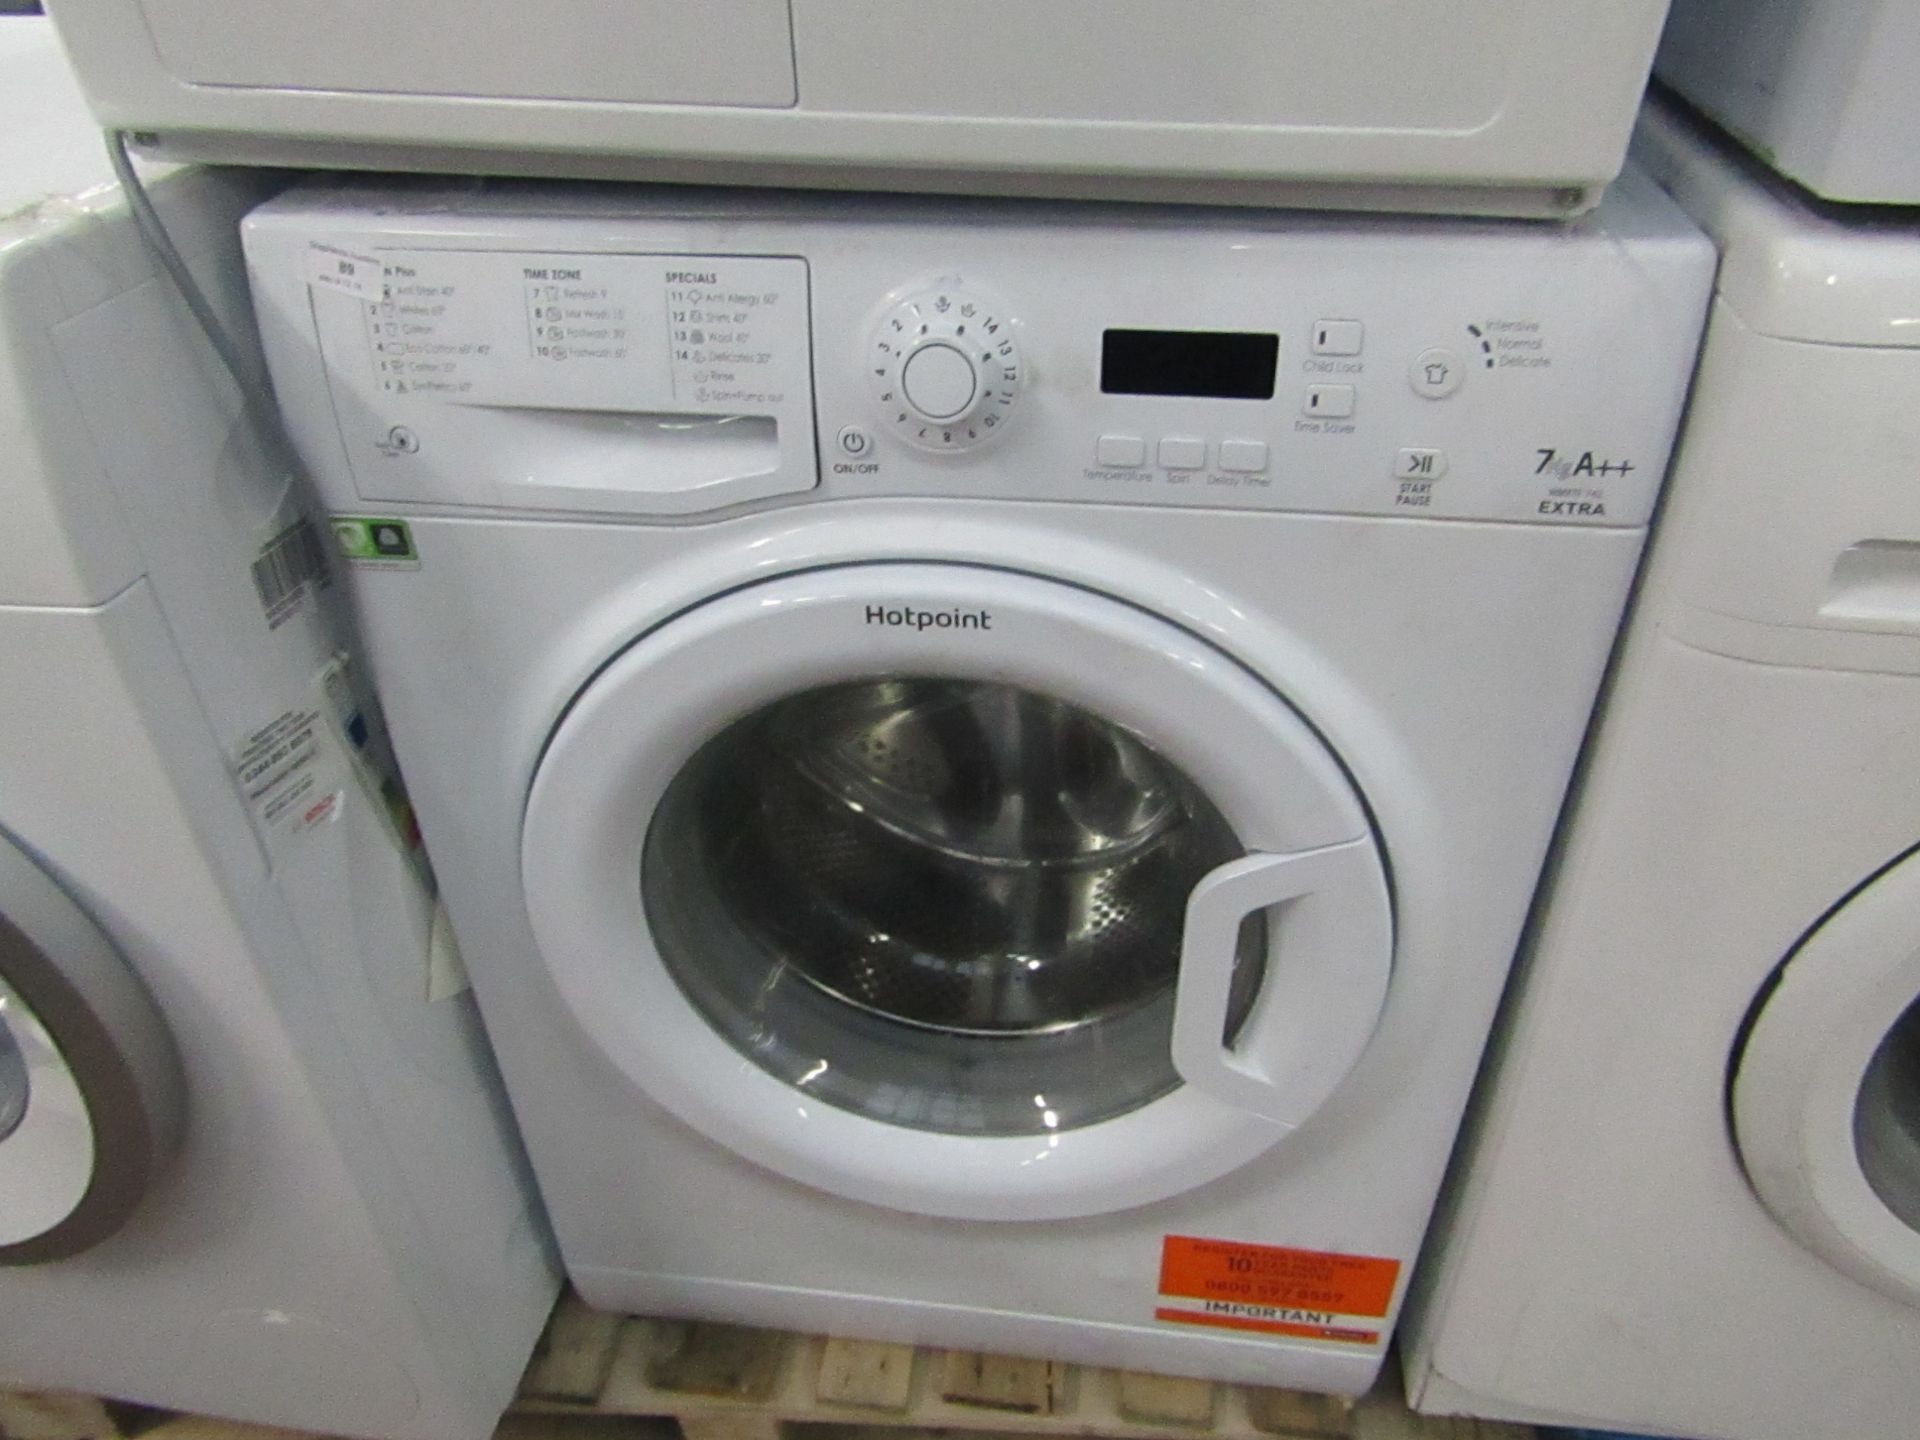 Hotpoint Extra 7Kg washing machine, powers on and spins.